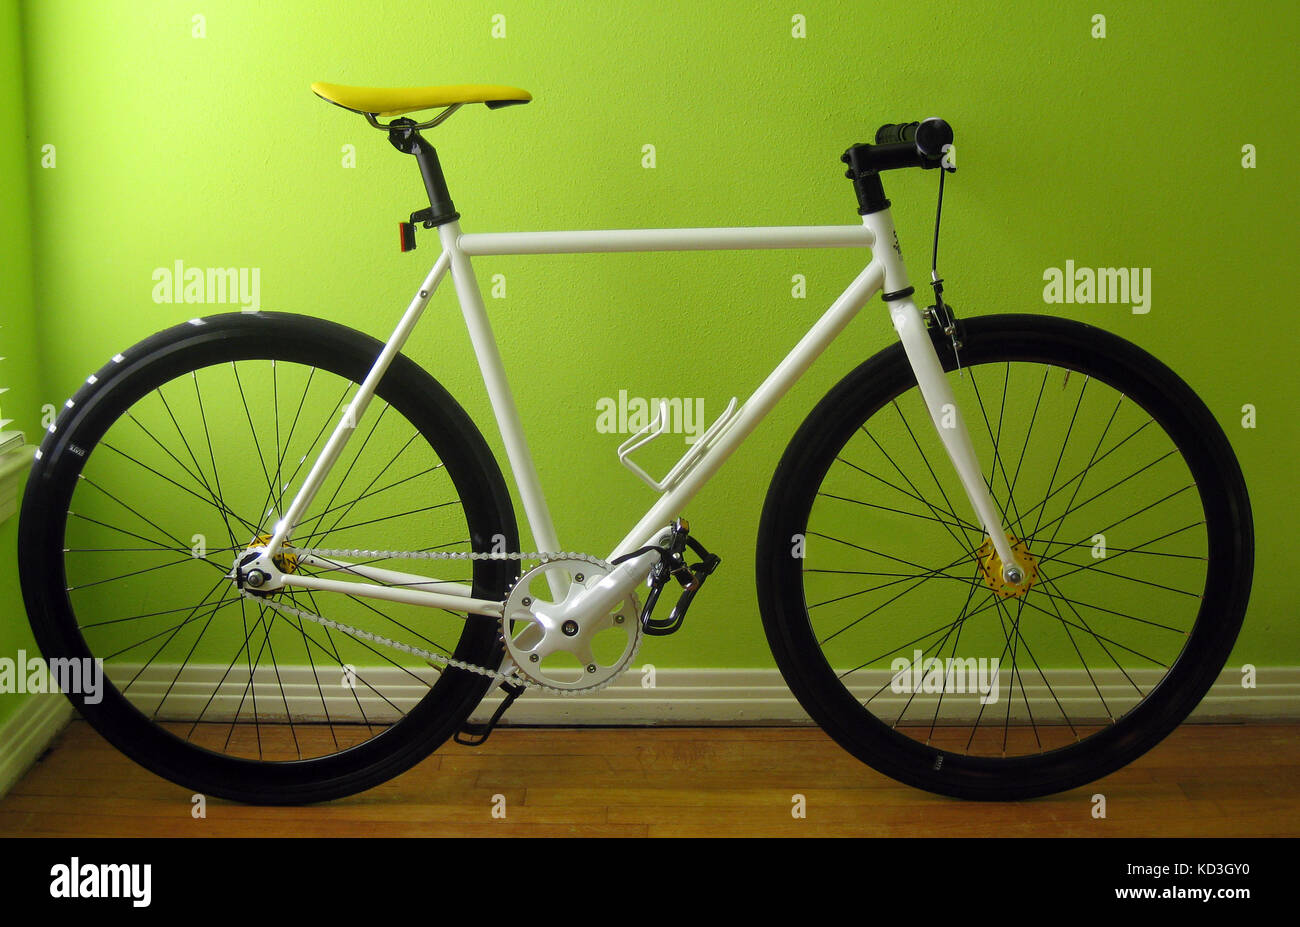 Single Speed steel frame bicycle leaning agains a bright green wall Stock Photo